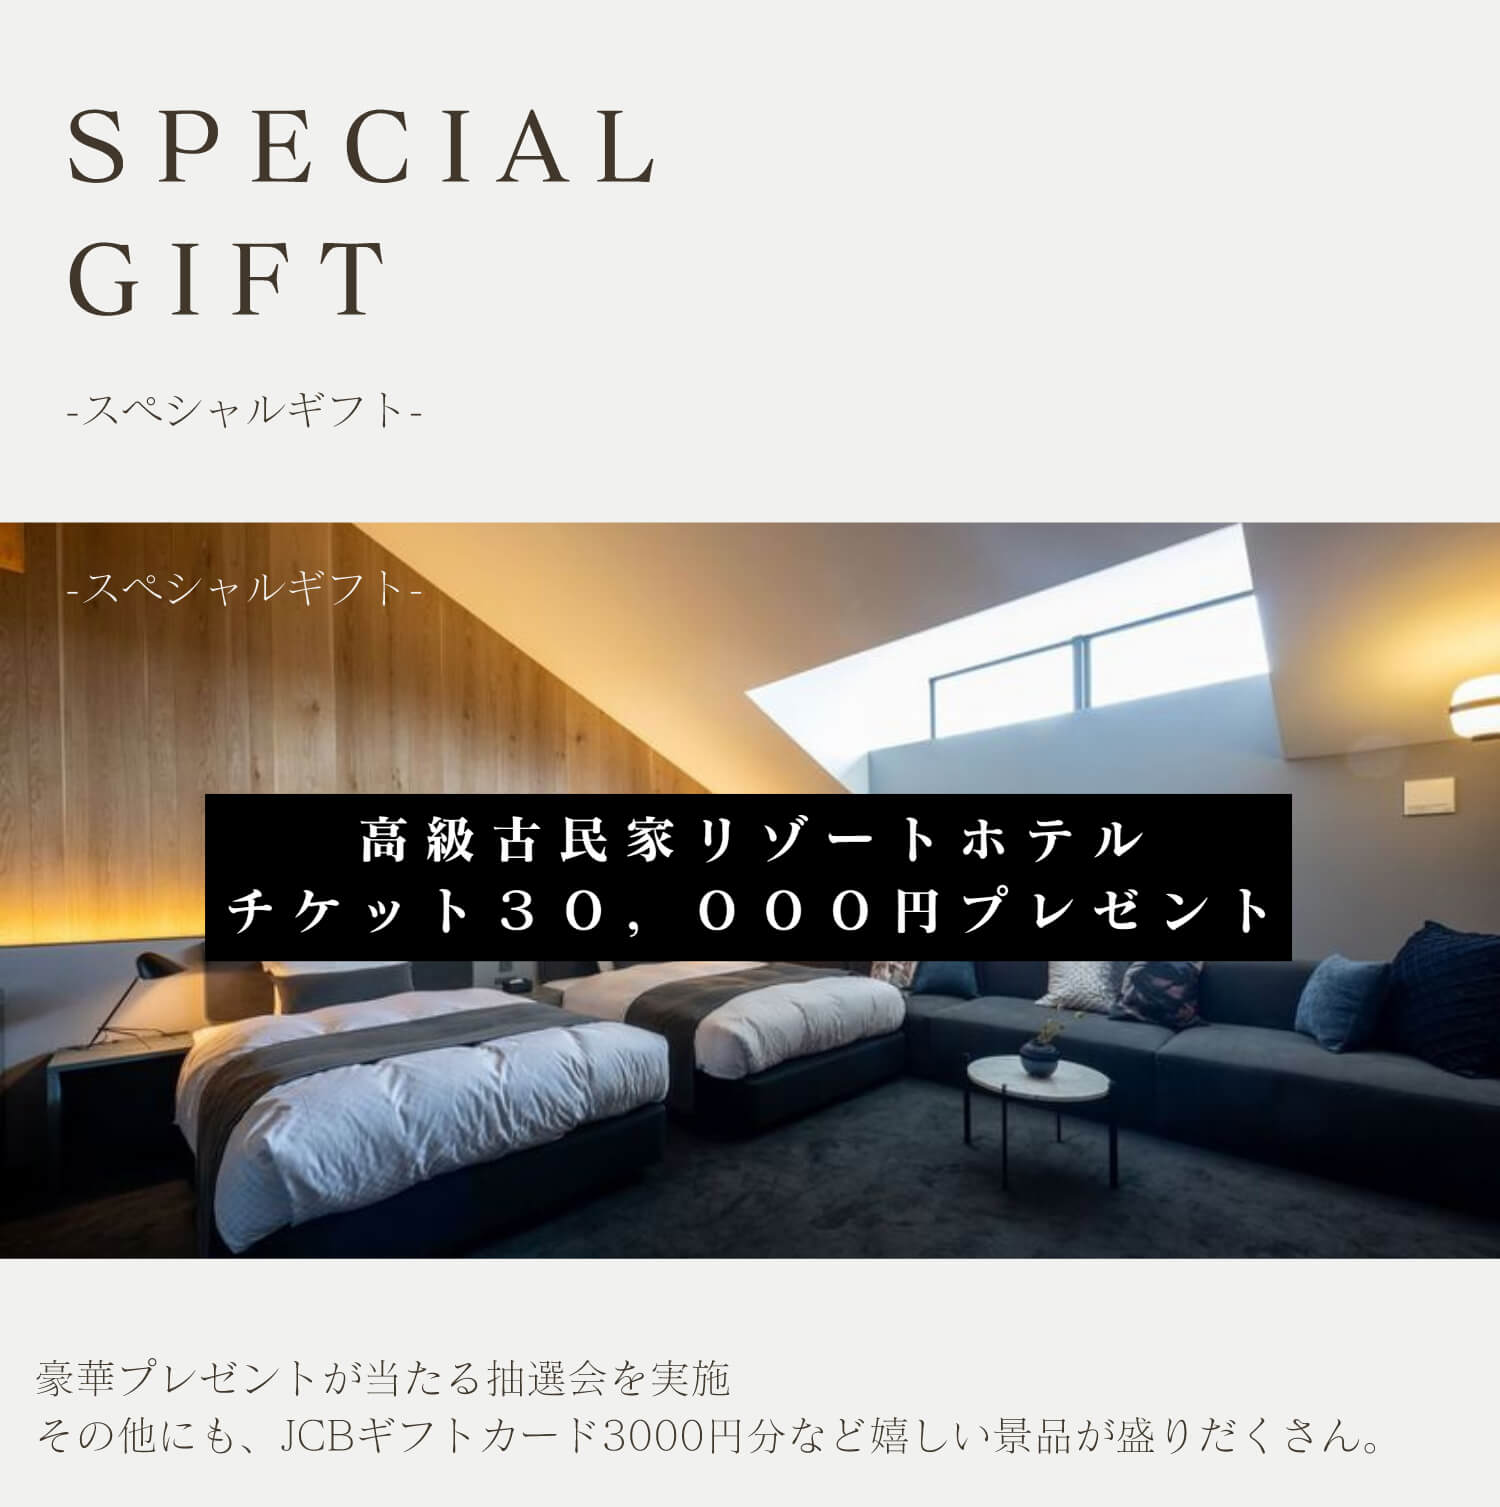 SPECIAL GIFT 高級古民家リゾートホテルチケット30,000円プレゼント